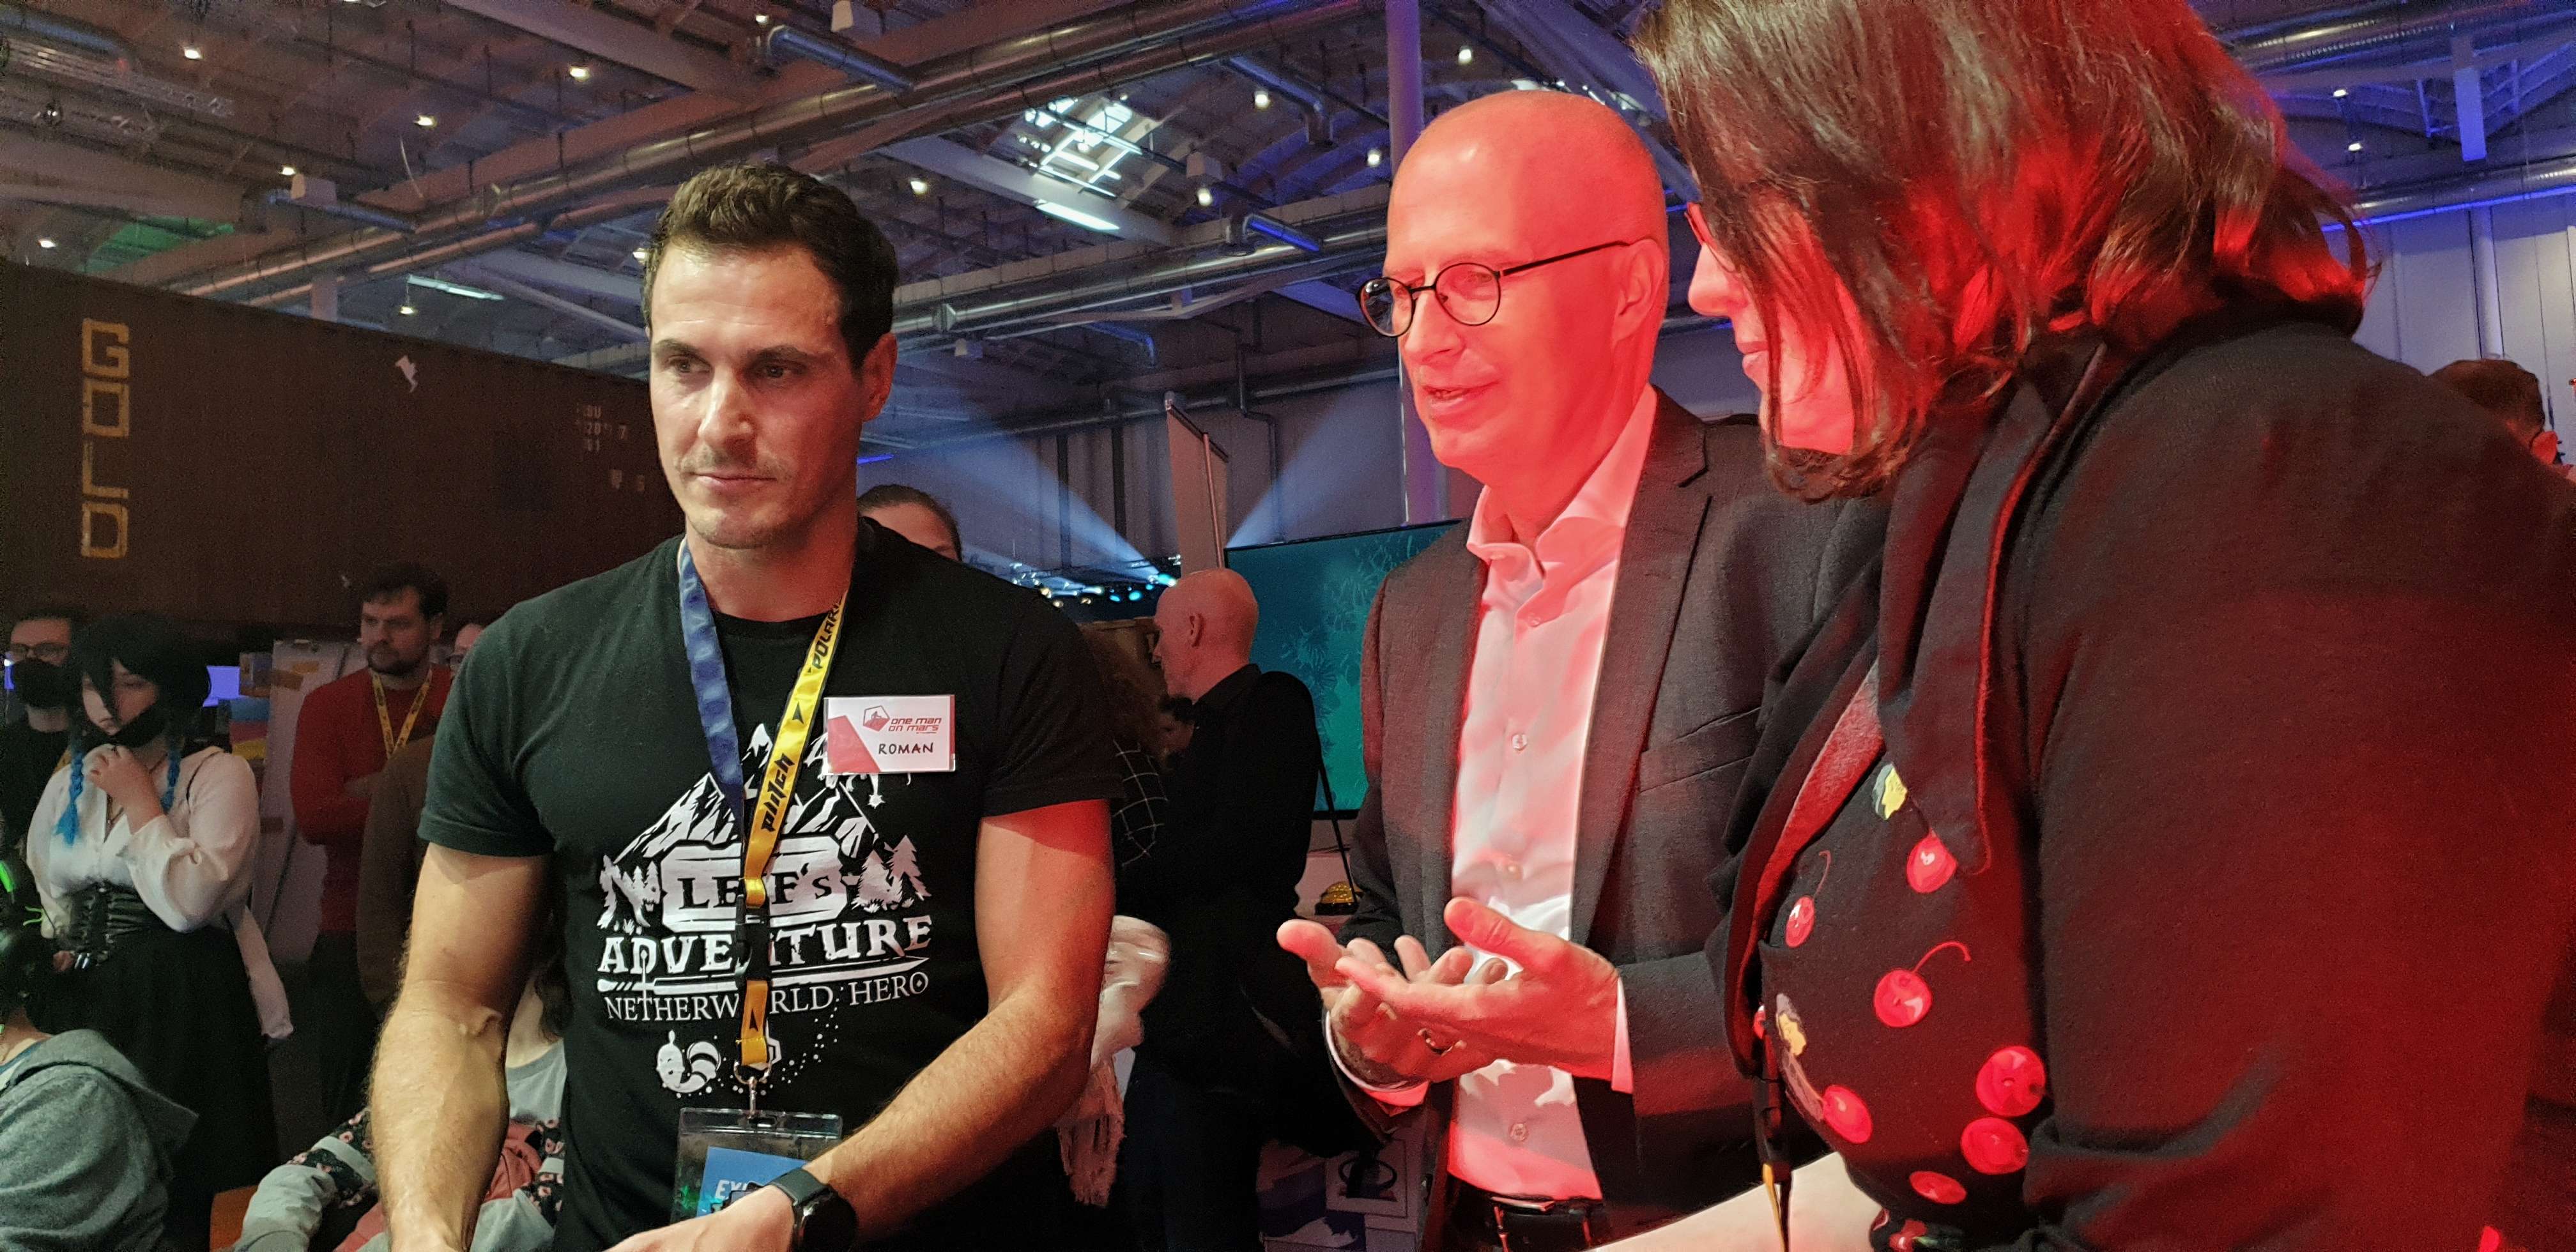 Dr. Peter Tschentscher talking to Roman Fuhrer from OneManOnMars and Anke Günther from Beardshaker Games